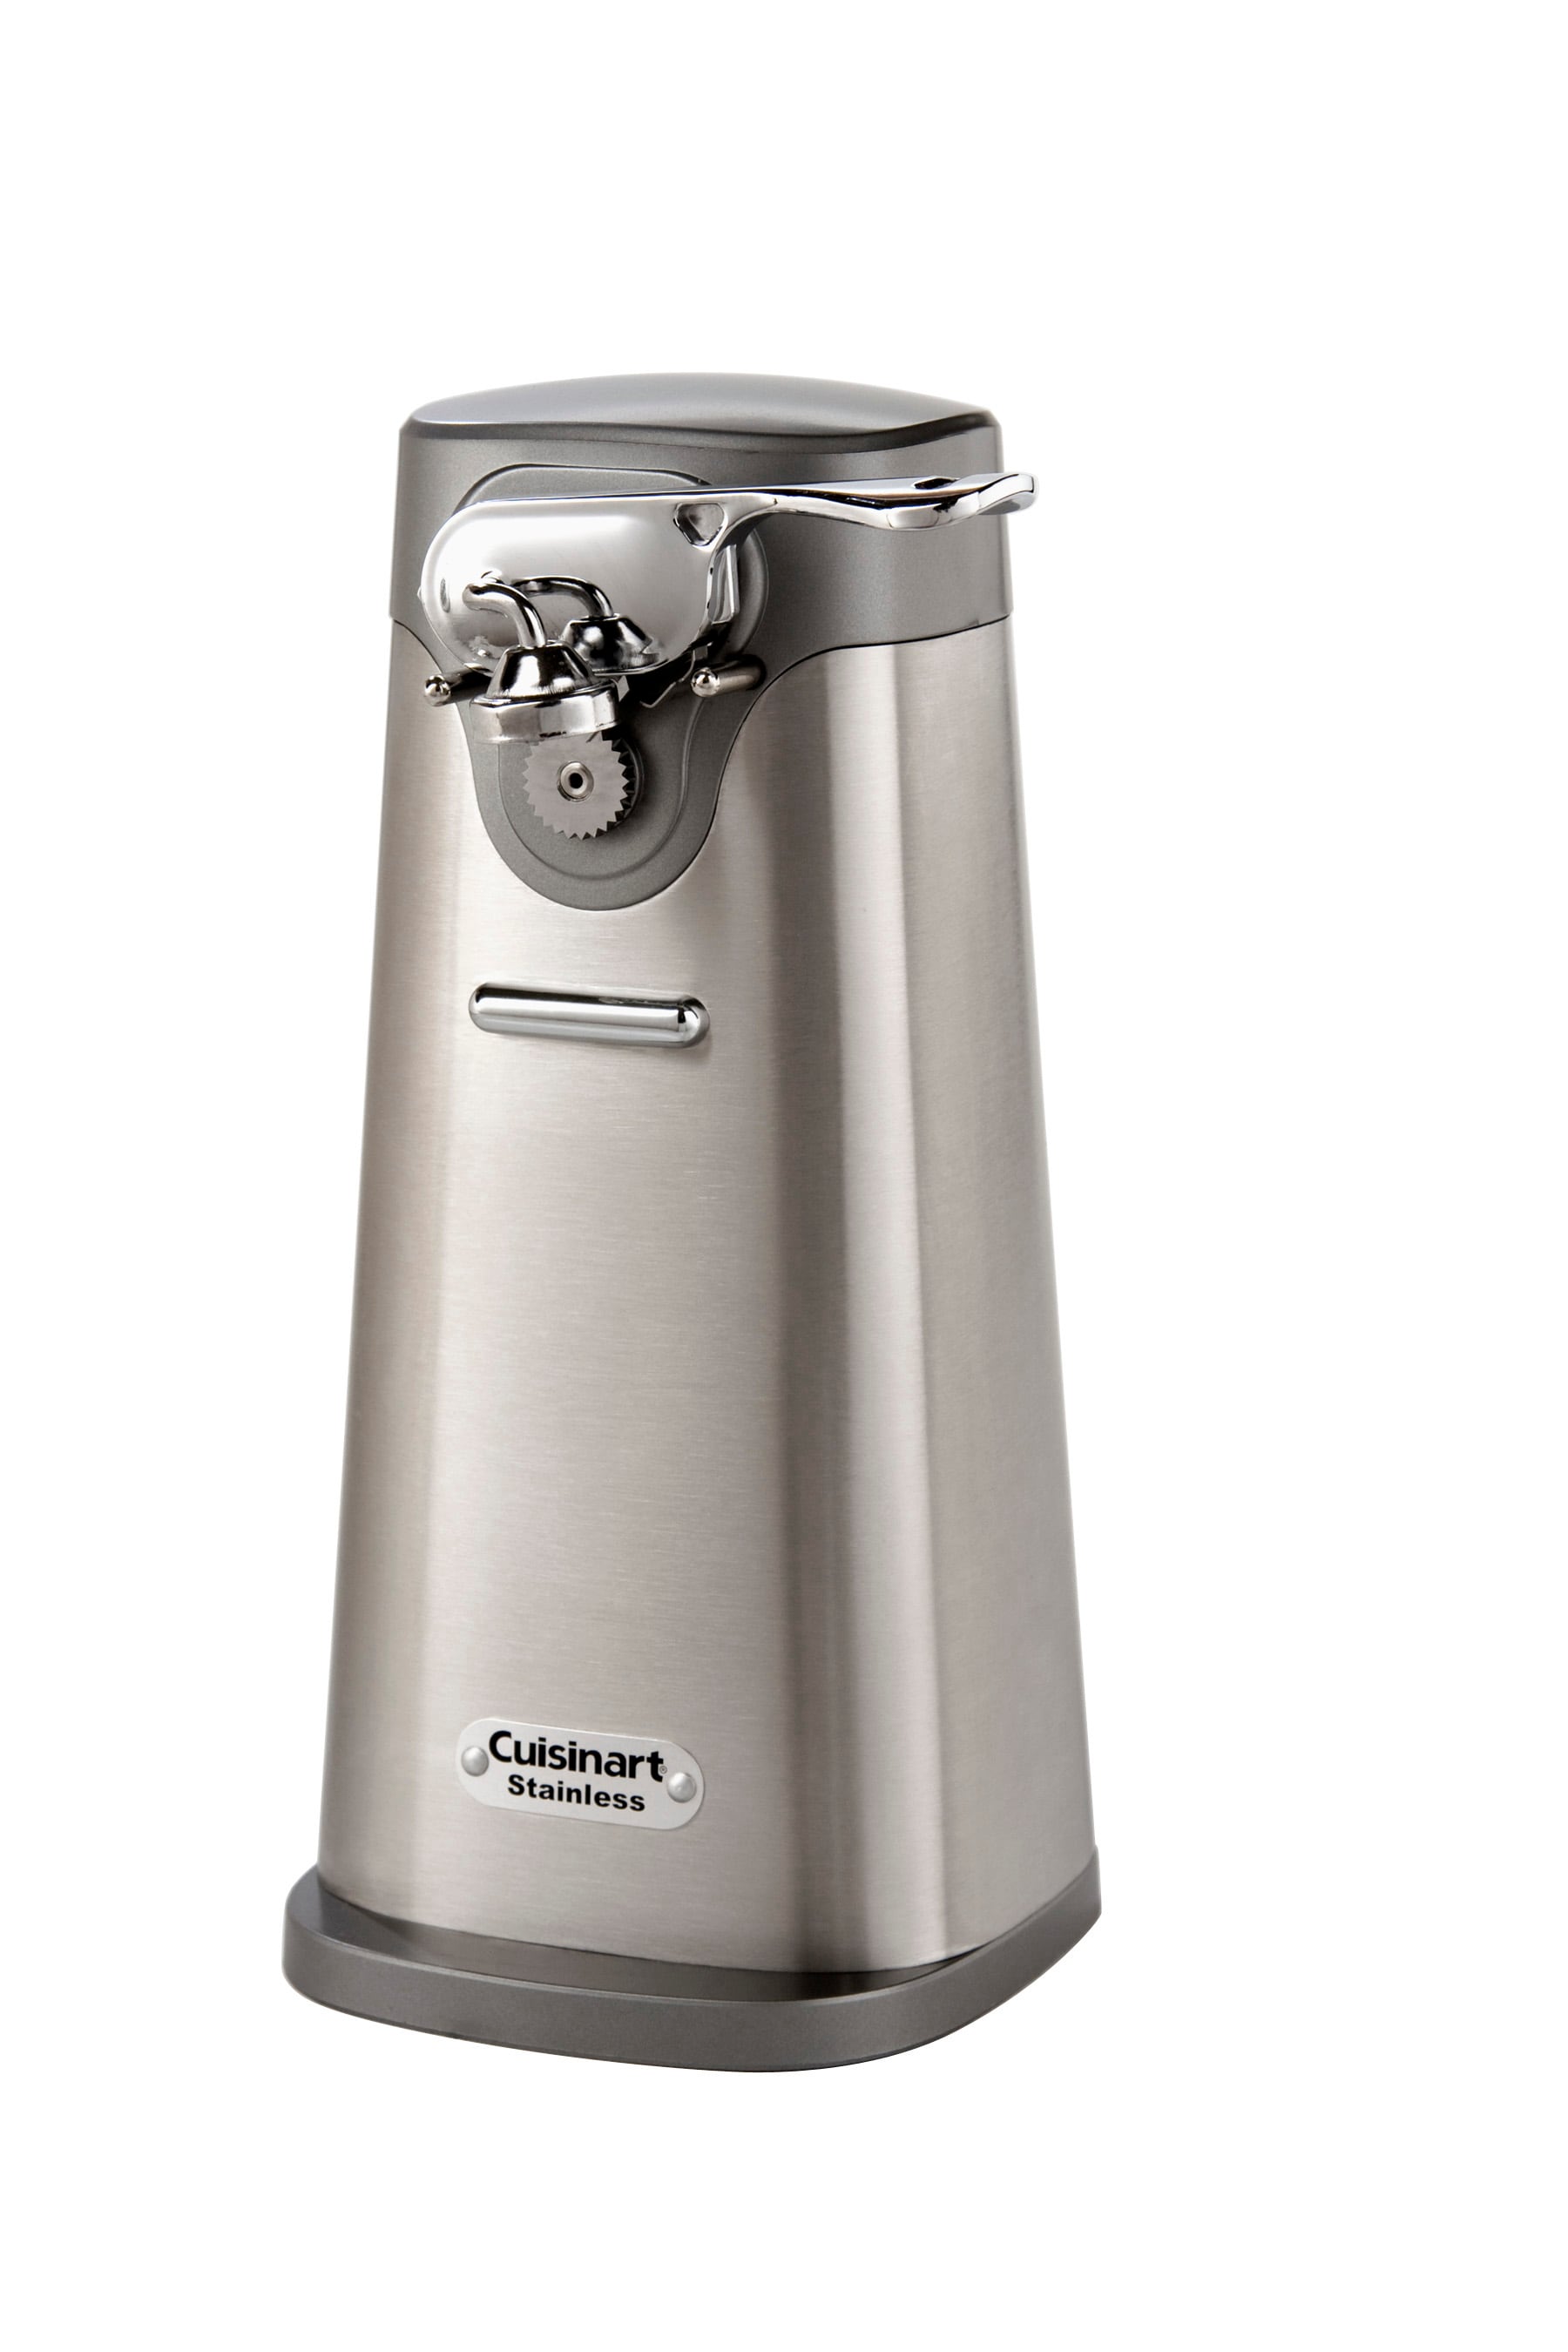 Cuisinart Stainless Steel Electric Countertop Can Opener at